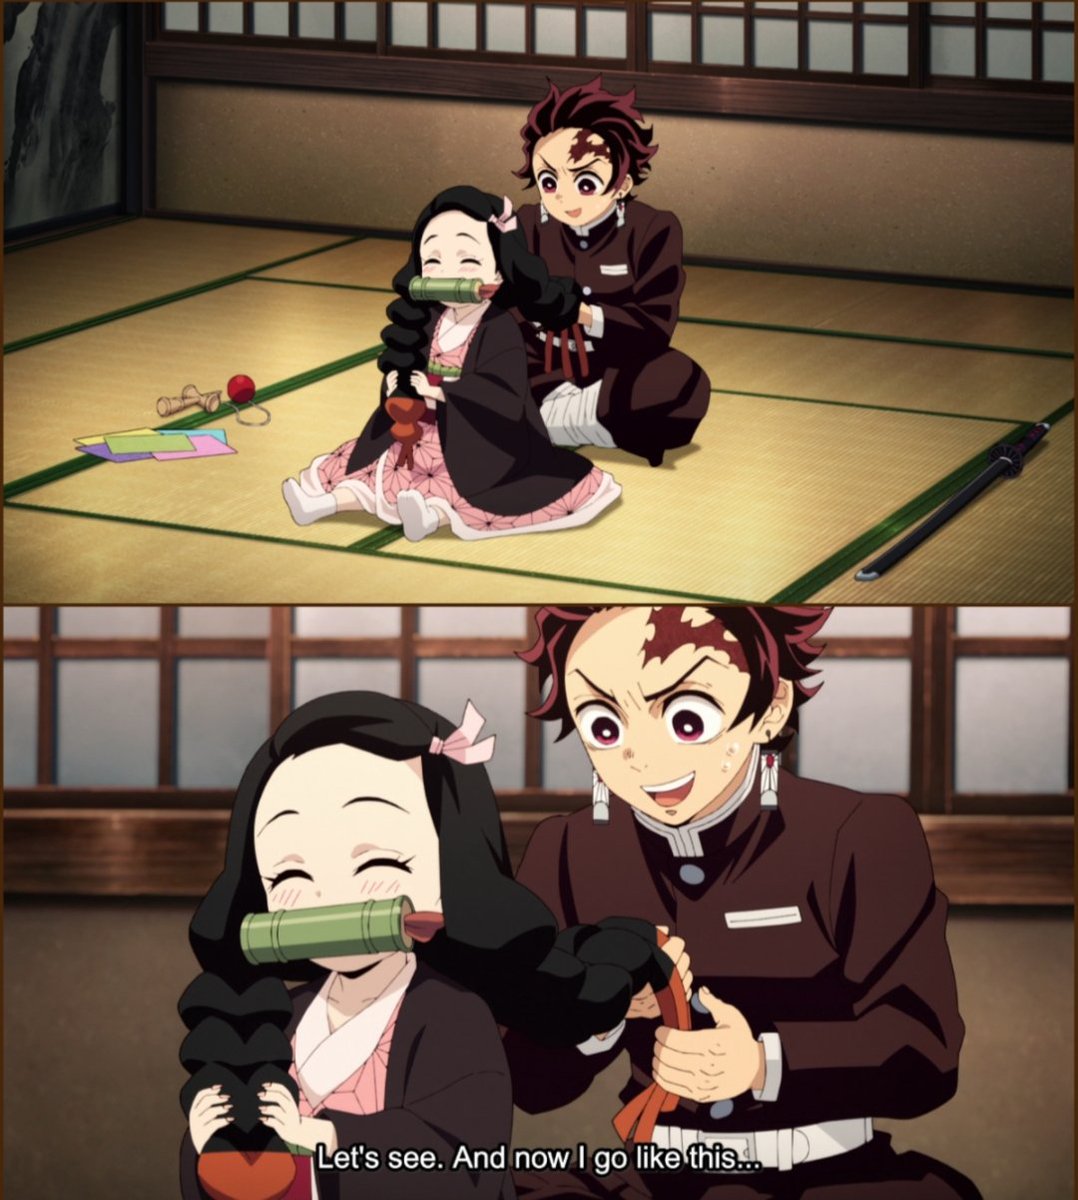 Awwwww... What An ADORABLE Scene!!! 💖(≧▽≦)💖
Tanjiro just proved he's THE BEST BROTHER EVER!!! 🥰💞🎴
#鬼滅の刃
#DemonSlayer 
#DemonSlayerToTheSwordsmithVillage
#ดาบพิฆาตอสูร